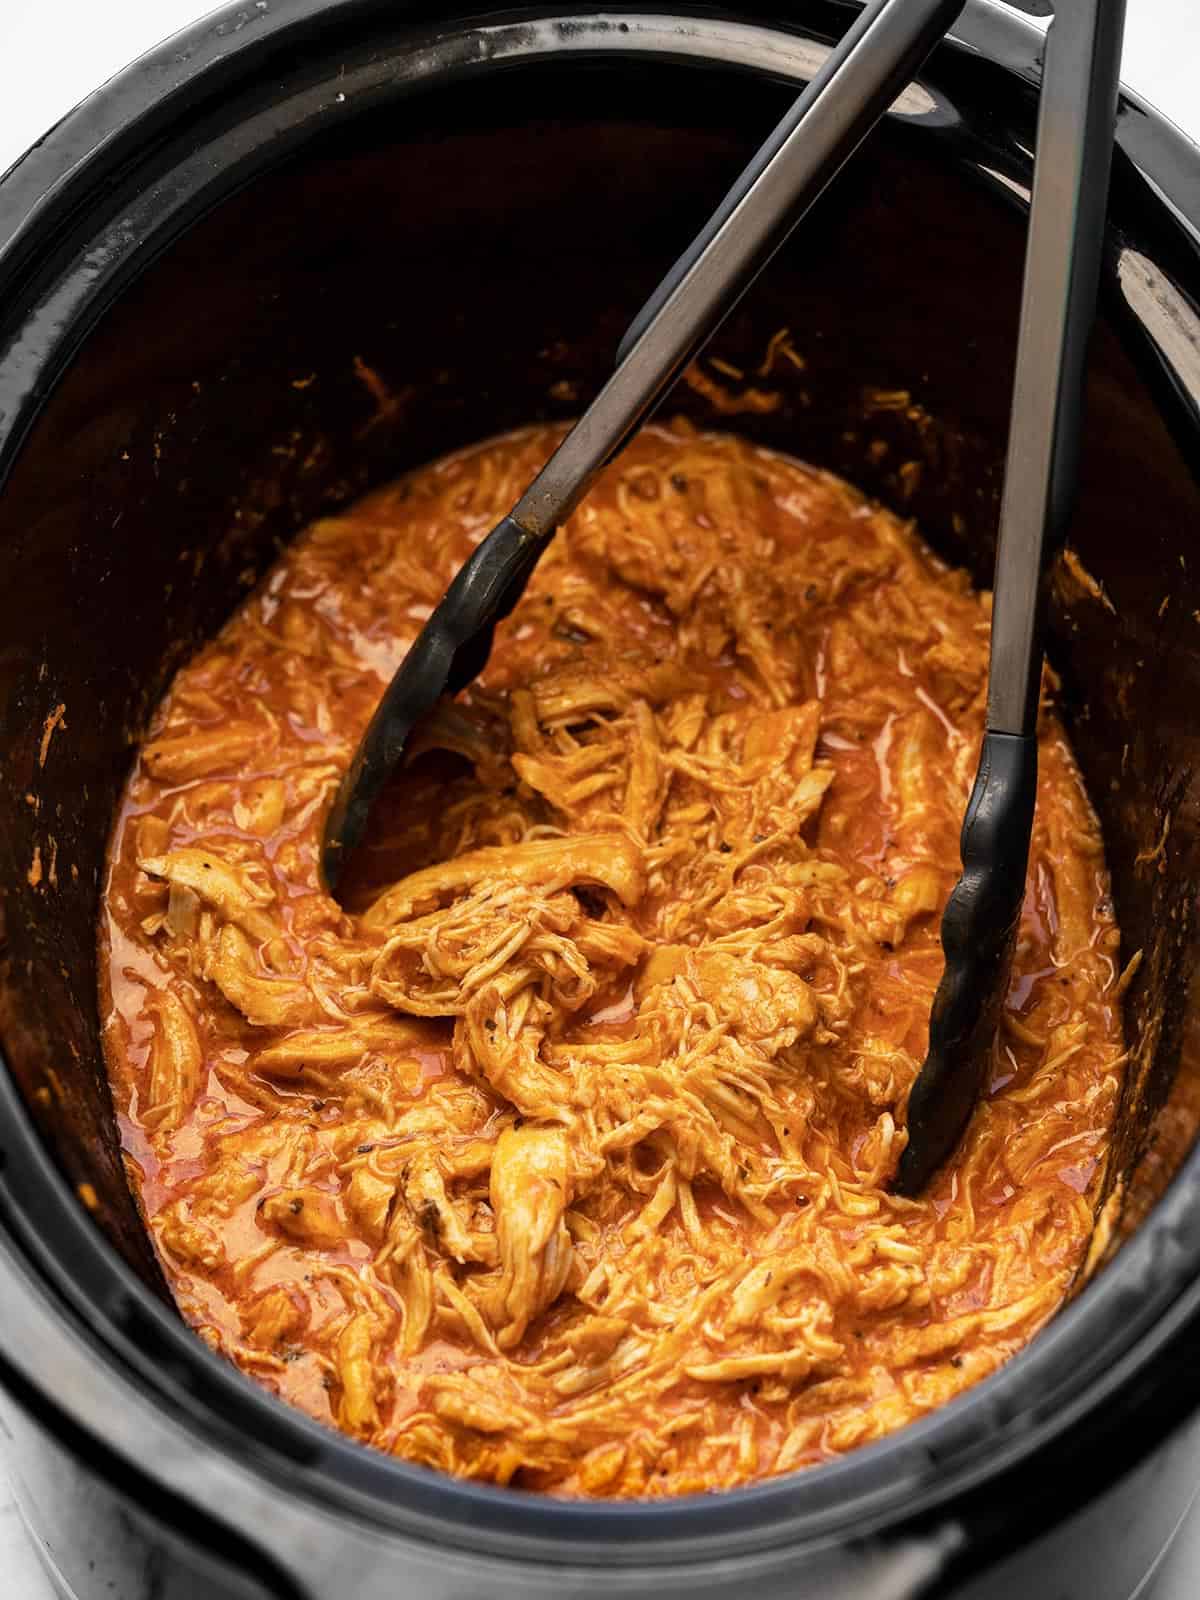 Shredded buffalo chicken in a slow cooker with tongs